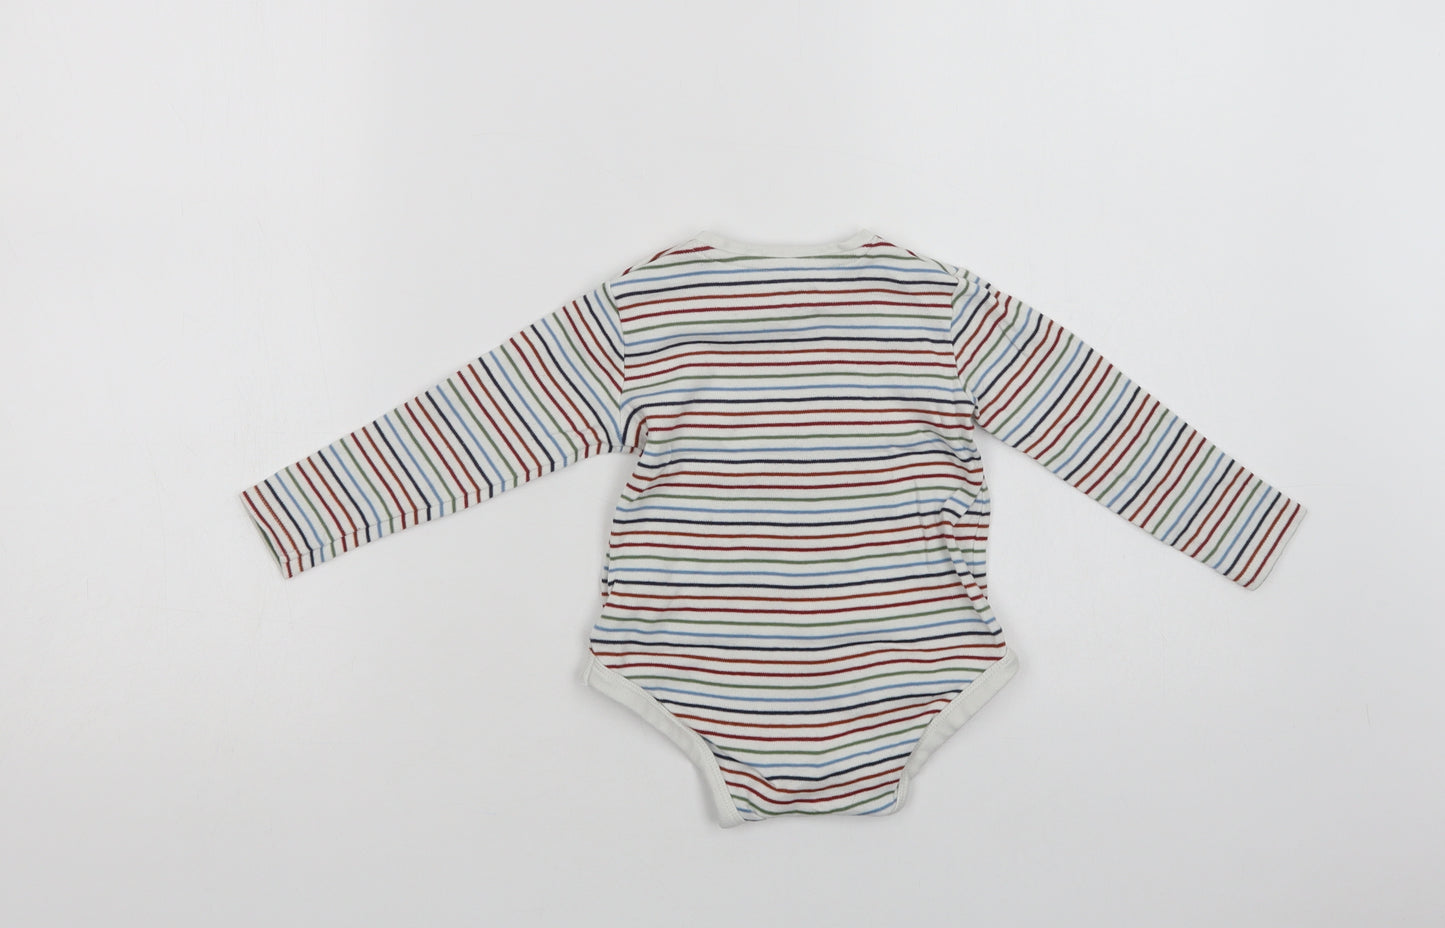 F&F Baby White Striped Cotton Babygrow One-Piece Size 12-18 Months  Snap